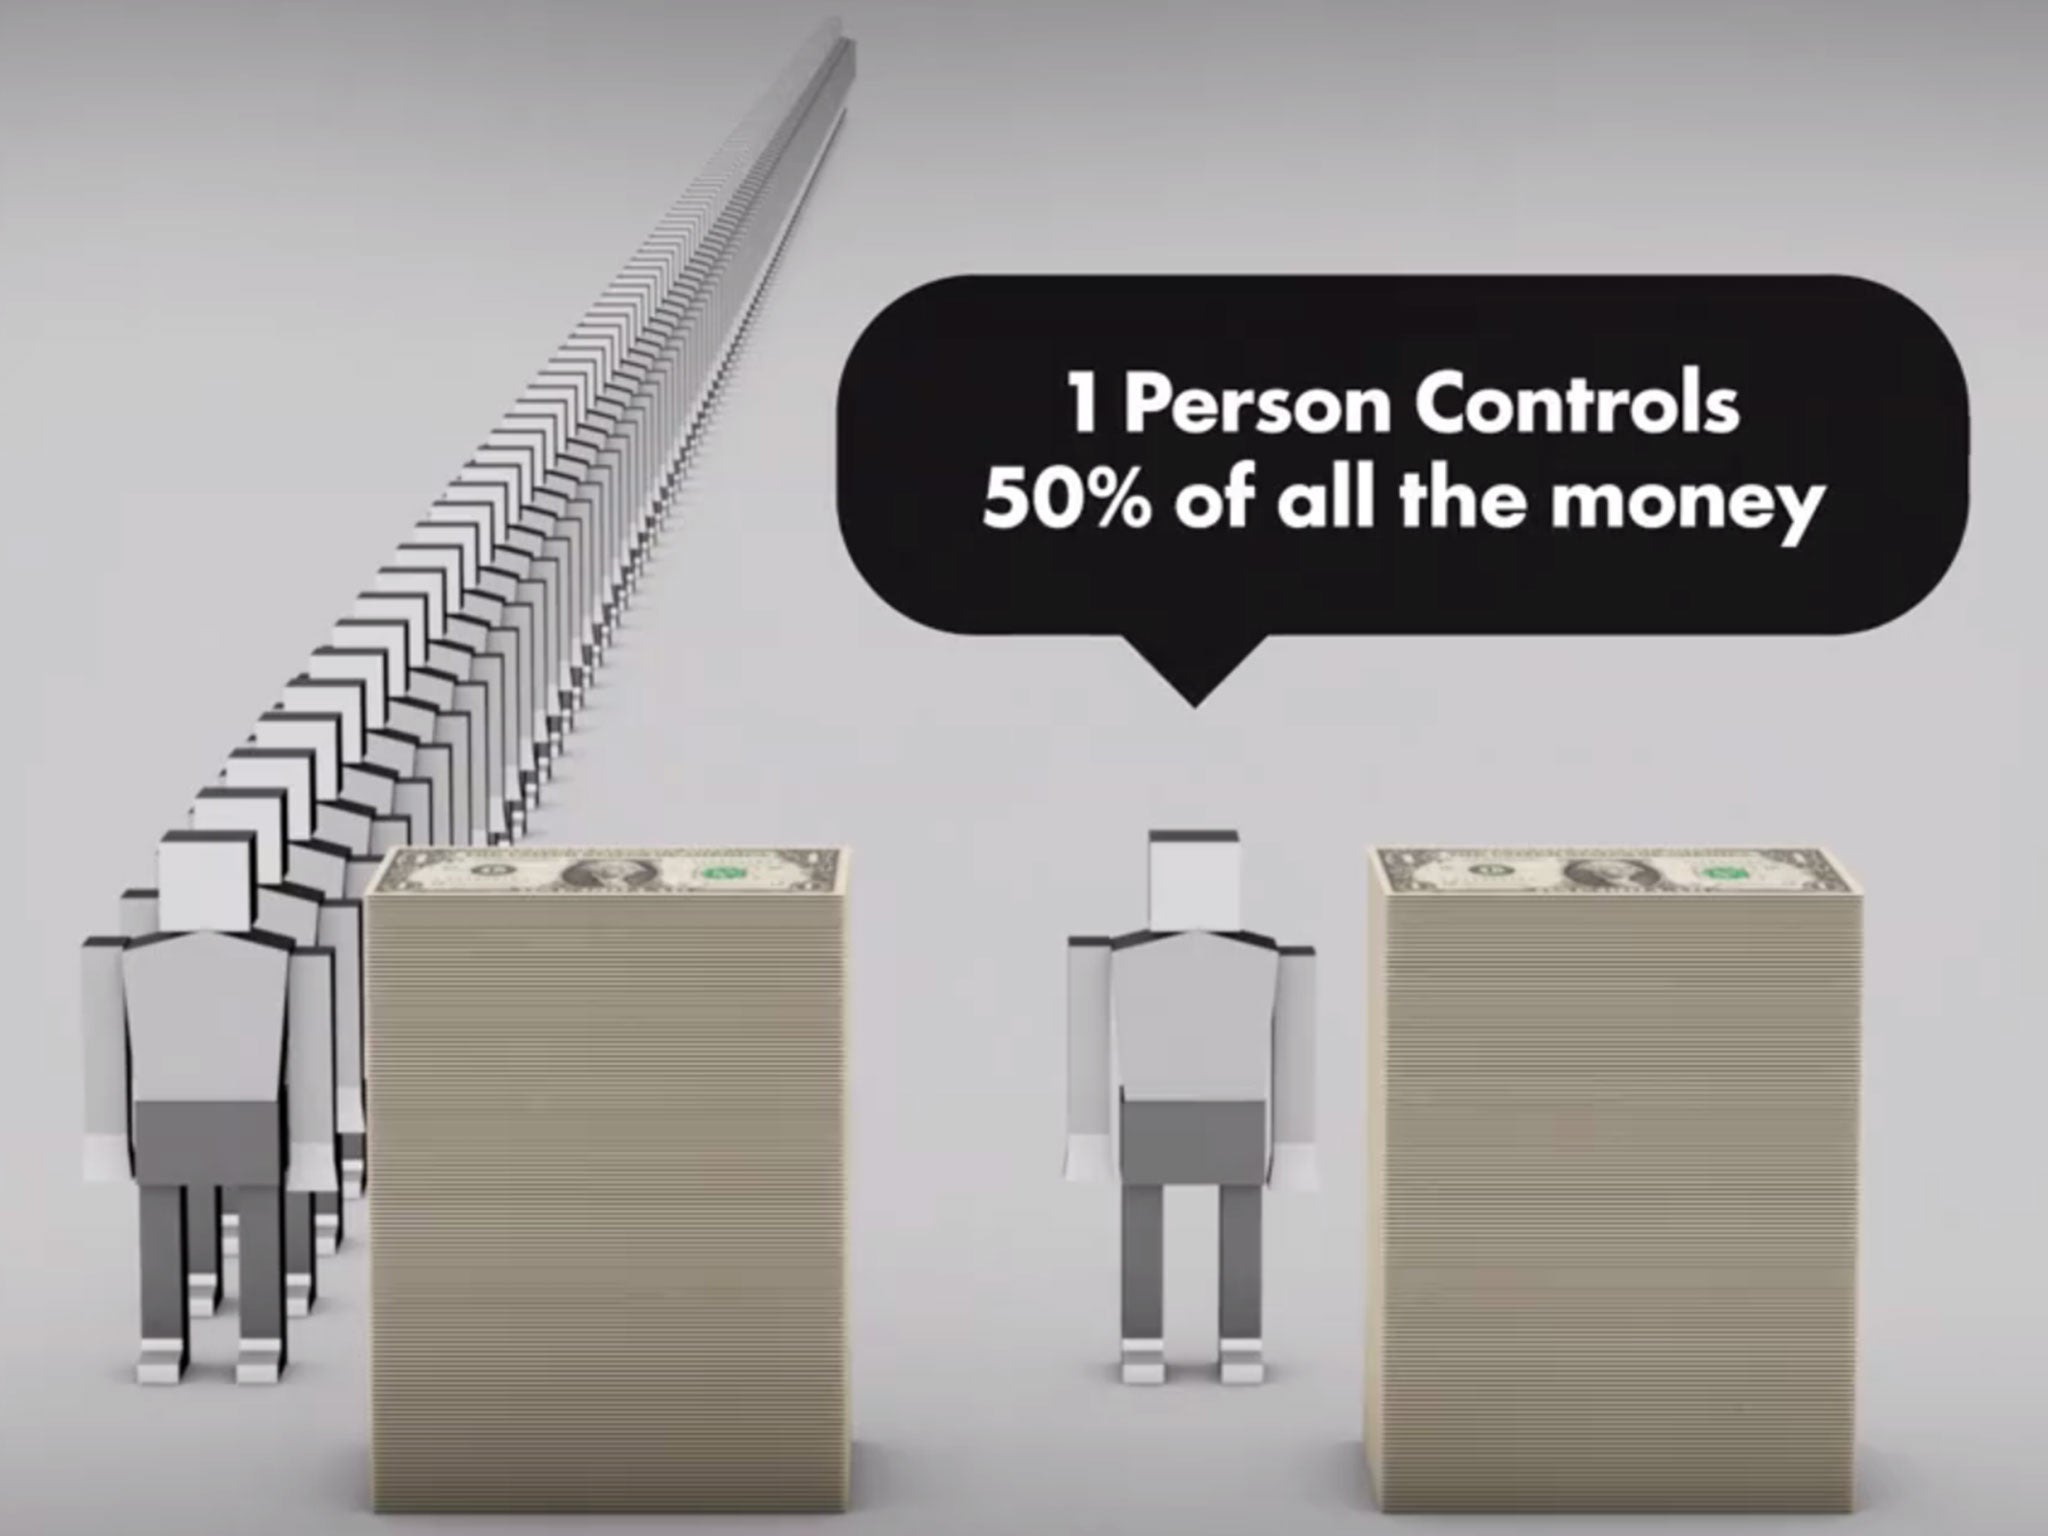 One person would control half of all the money in the world